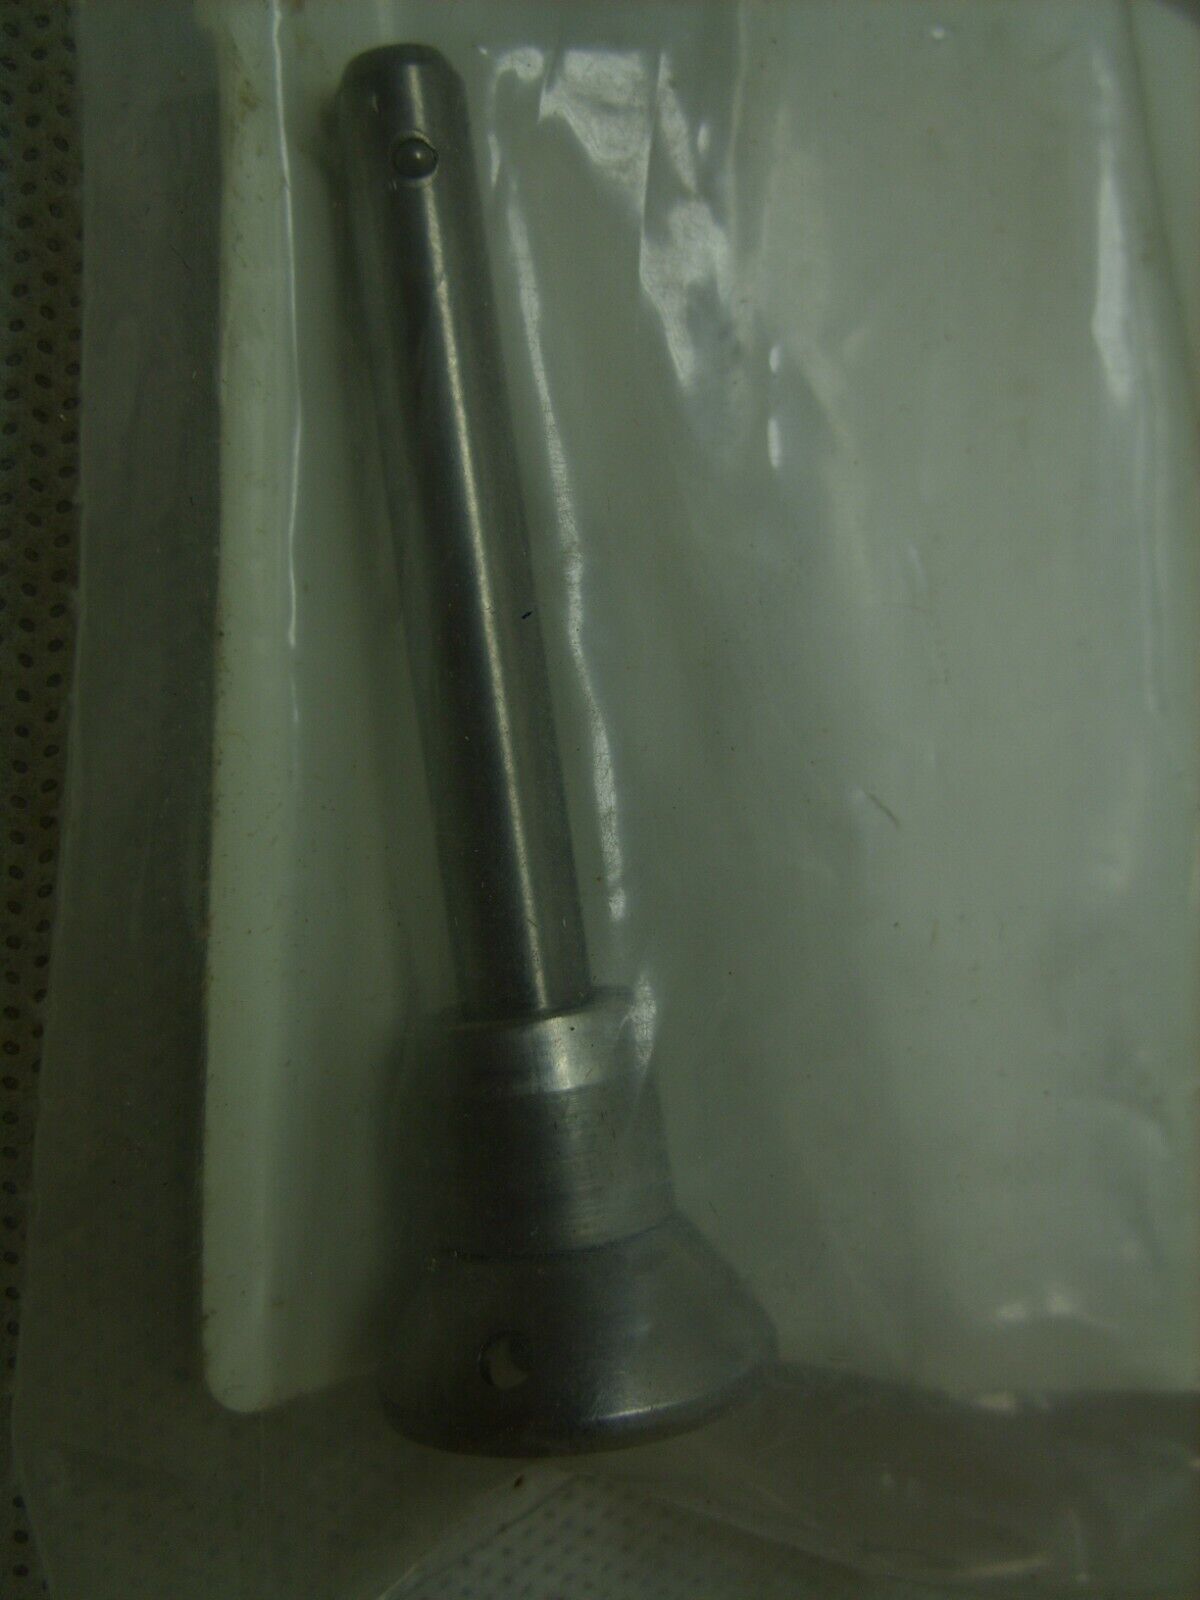 VARIAN Agilent - Quick Release Pin for Load Lock Ram Assy. - 1922989900 - NOS 